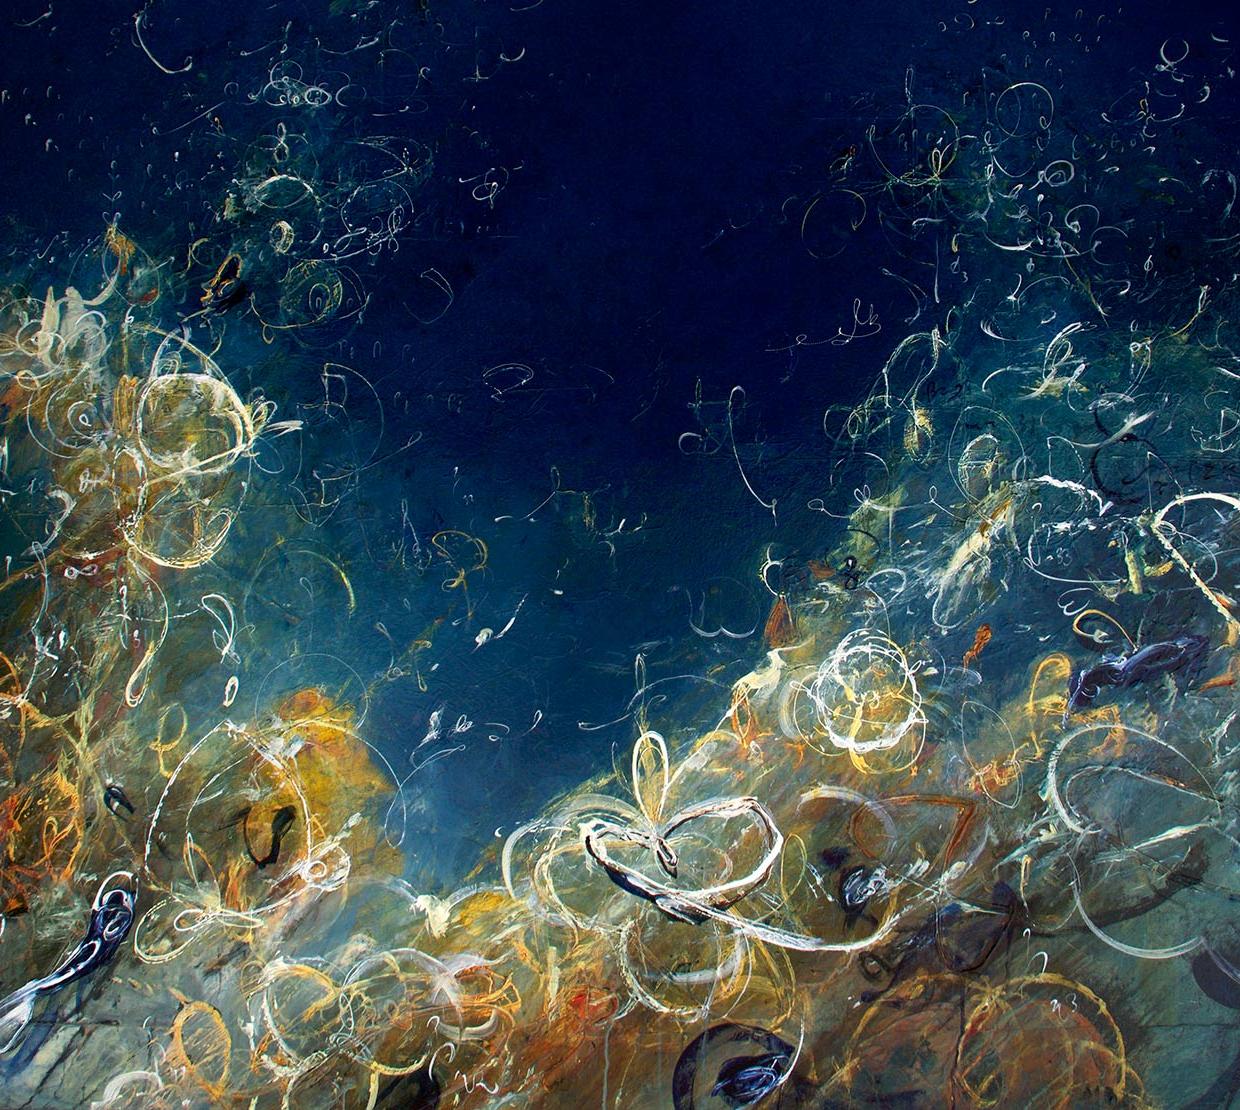 Michael Schultheis painting of ocean shore made of mathematical imagery